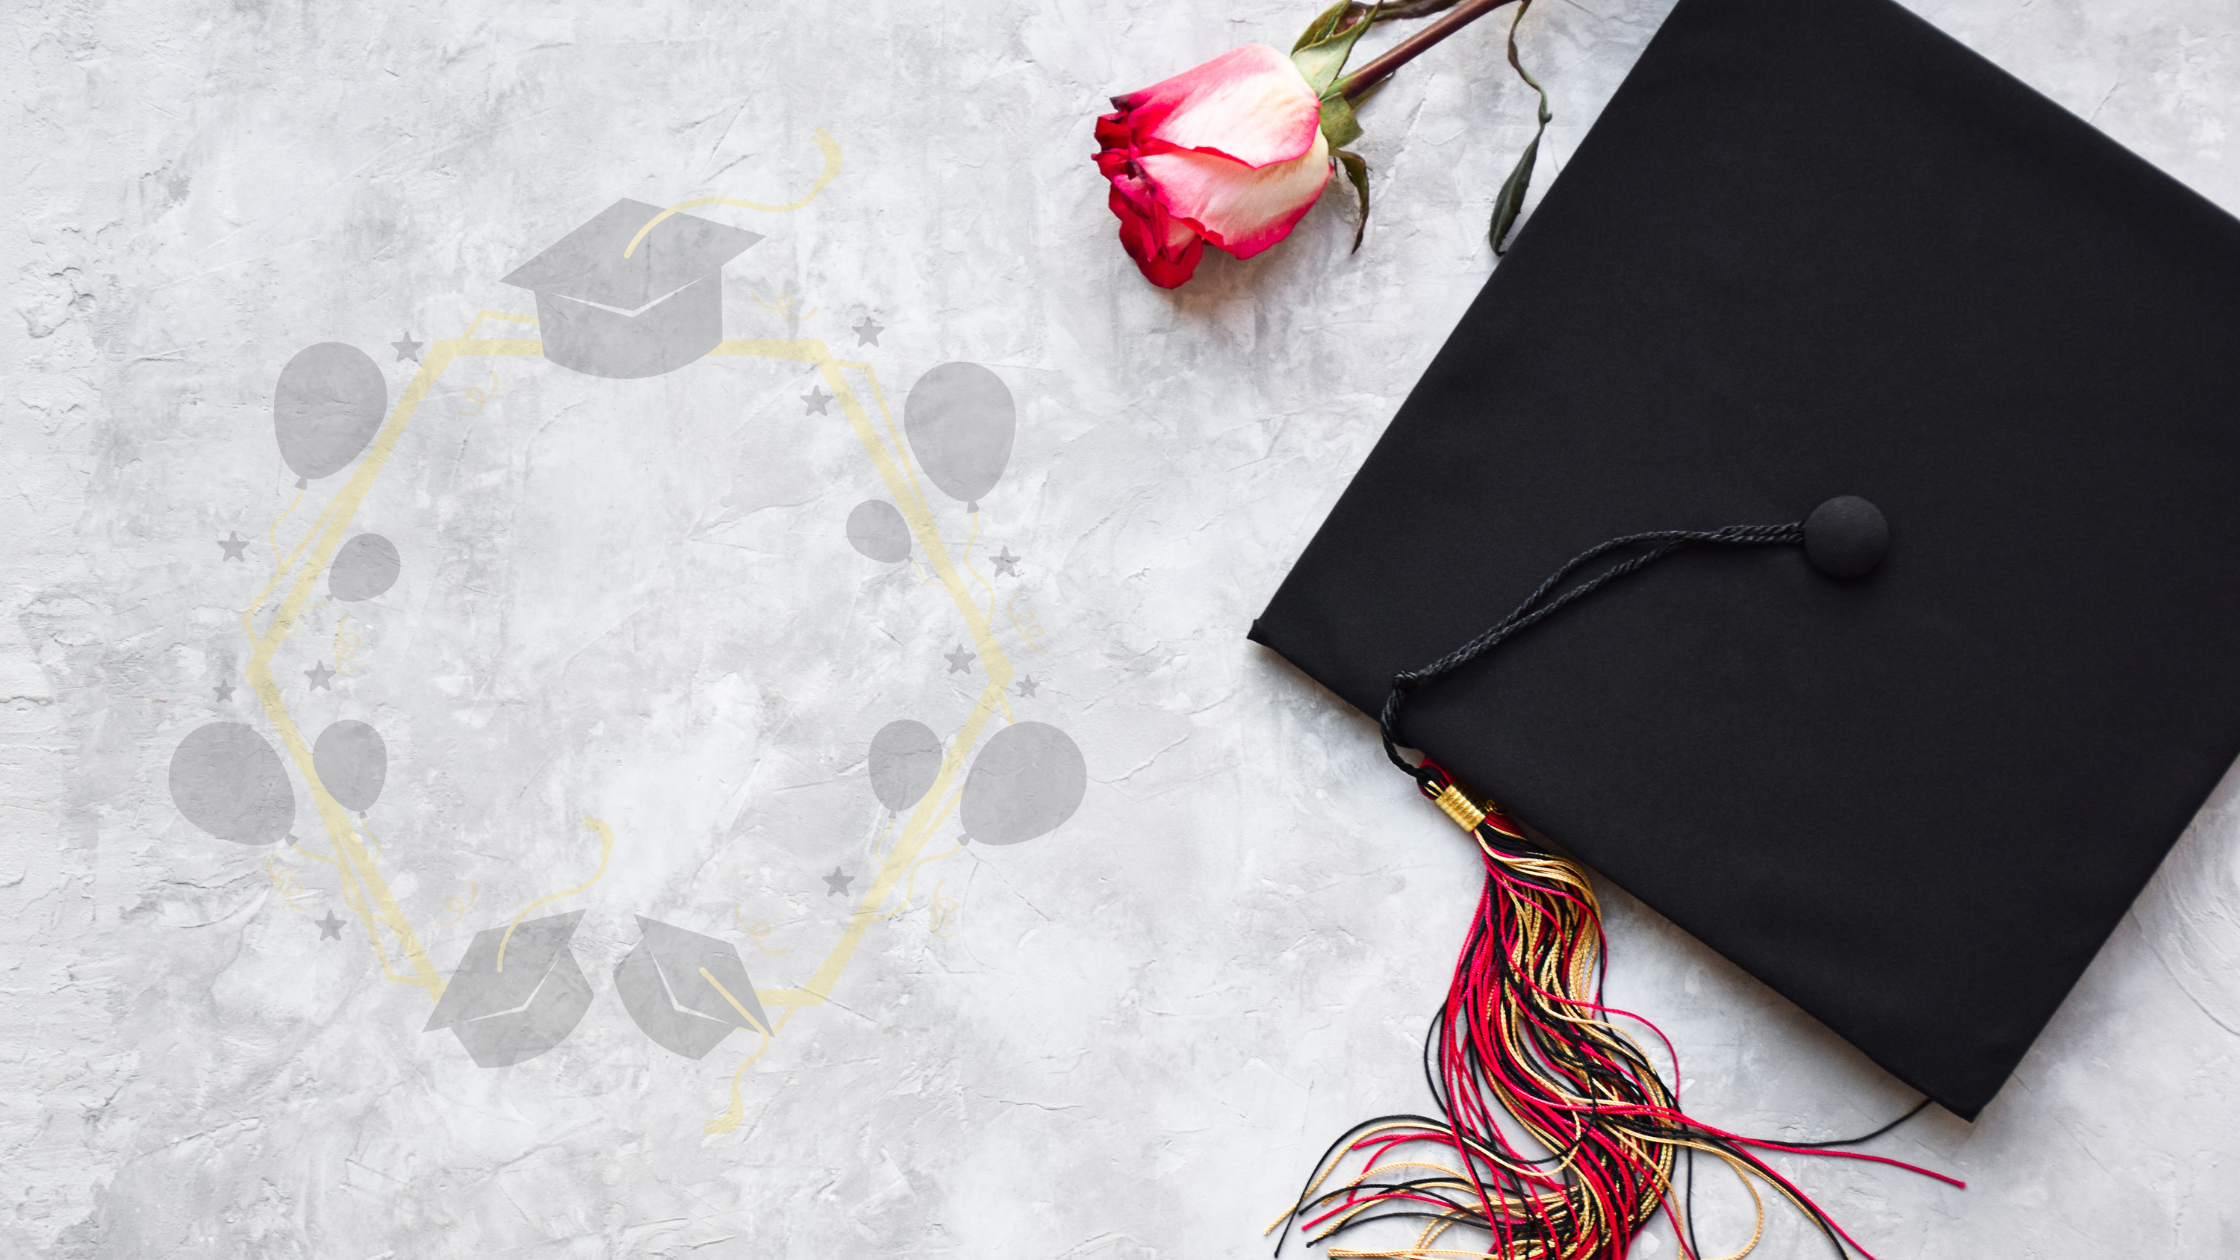 Best Ways to decorate Graduation Cap without Ruining it